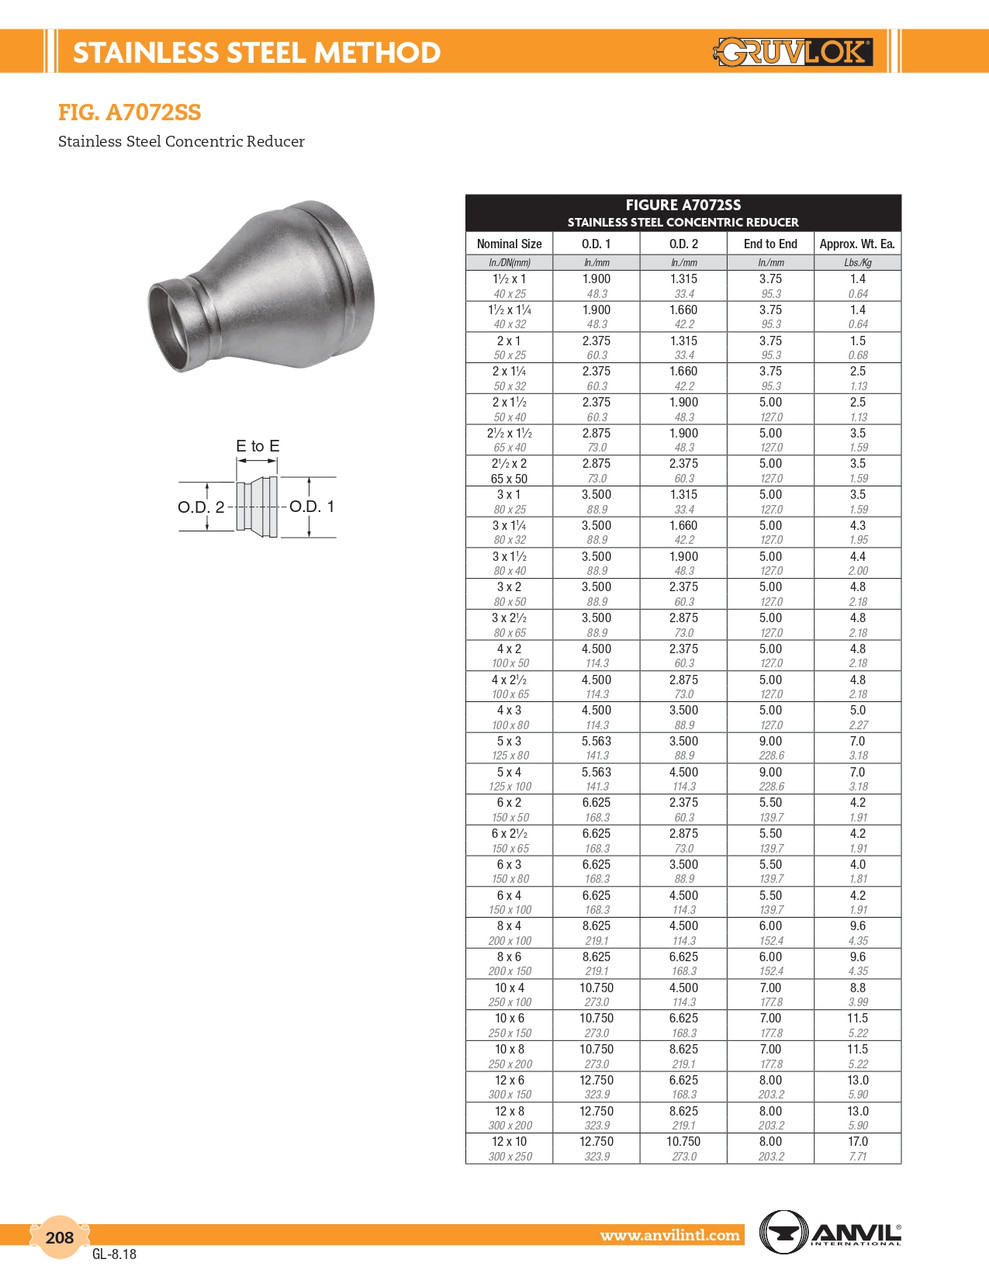 Fig. A7072SS Stainless Concentric Reducer 2 x 1-1/2"